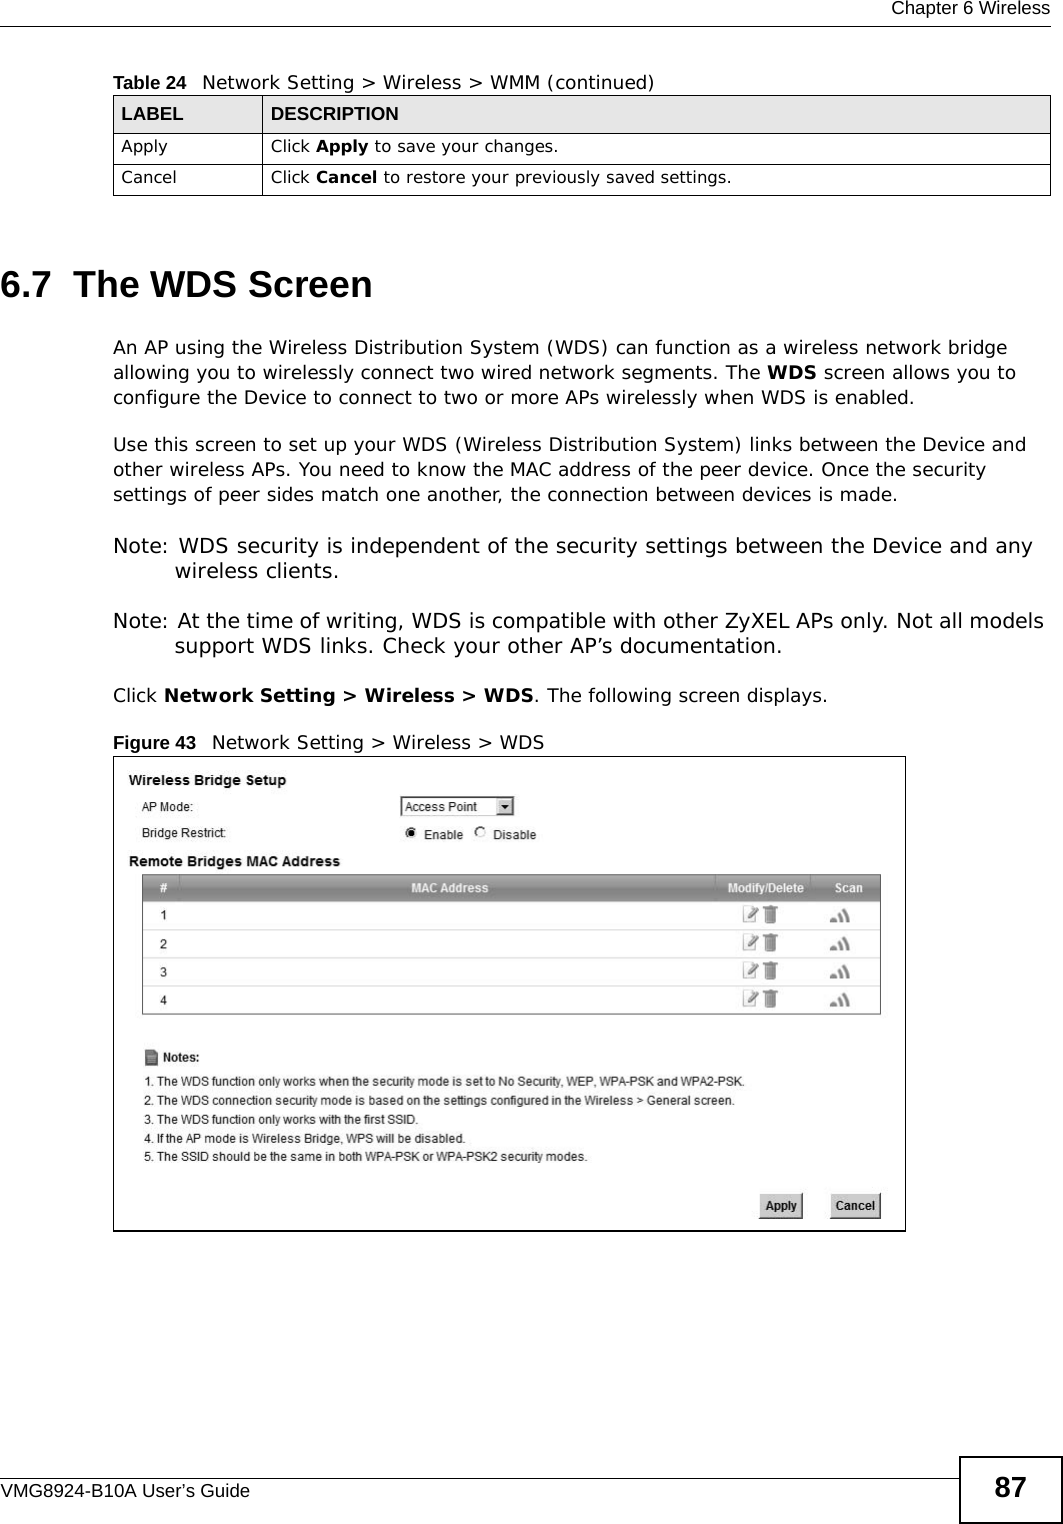  Chapter 6 WirelessVMG8924-B10A User’s Guide 876.7  The WDS ScreenAn AP using the Wireless Distribution System (WDS) can function as a wireless network bridge allowing you to wirelessly connect two wired network segments. The WDS screen allows you to configure the Device to connect to two or more APs wirelessly when WDS is enabled. Use this screen to set up your WDS (Wireless Distribution System) links between the Device and other wireless APs. You need to know the MAC address of the peer device. Once the security settings of peer sides match one another, the connection between devices is made. Note: WDS security is independent of the security settings between the Device and any wireless clients.Note: At the time of writing, WDS is compatible with other ZyXEL APs only. Not all models support WDS links. Check your other AP’s documentation.Click Network Setting &gt; Wireless &gt; WDS. The following screen displays.Figure 43   Network Setting &gt; Wireless &gt; WDSApply Click Apply to save your changes.Cancel Click Cancel to restore your previously saved settings.Table 24   Network Setting &gt; Wireless &gt; WMM (continued)LABEL DESCRIPTION